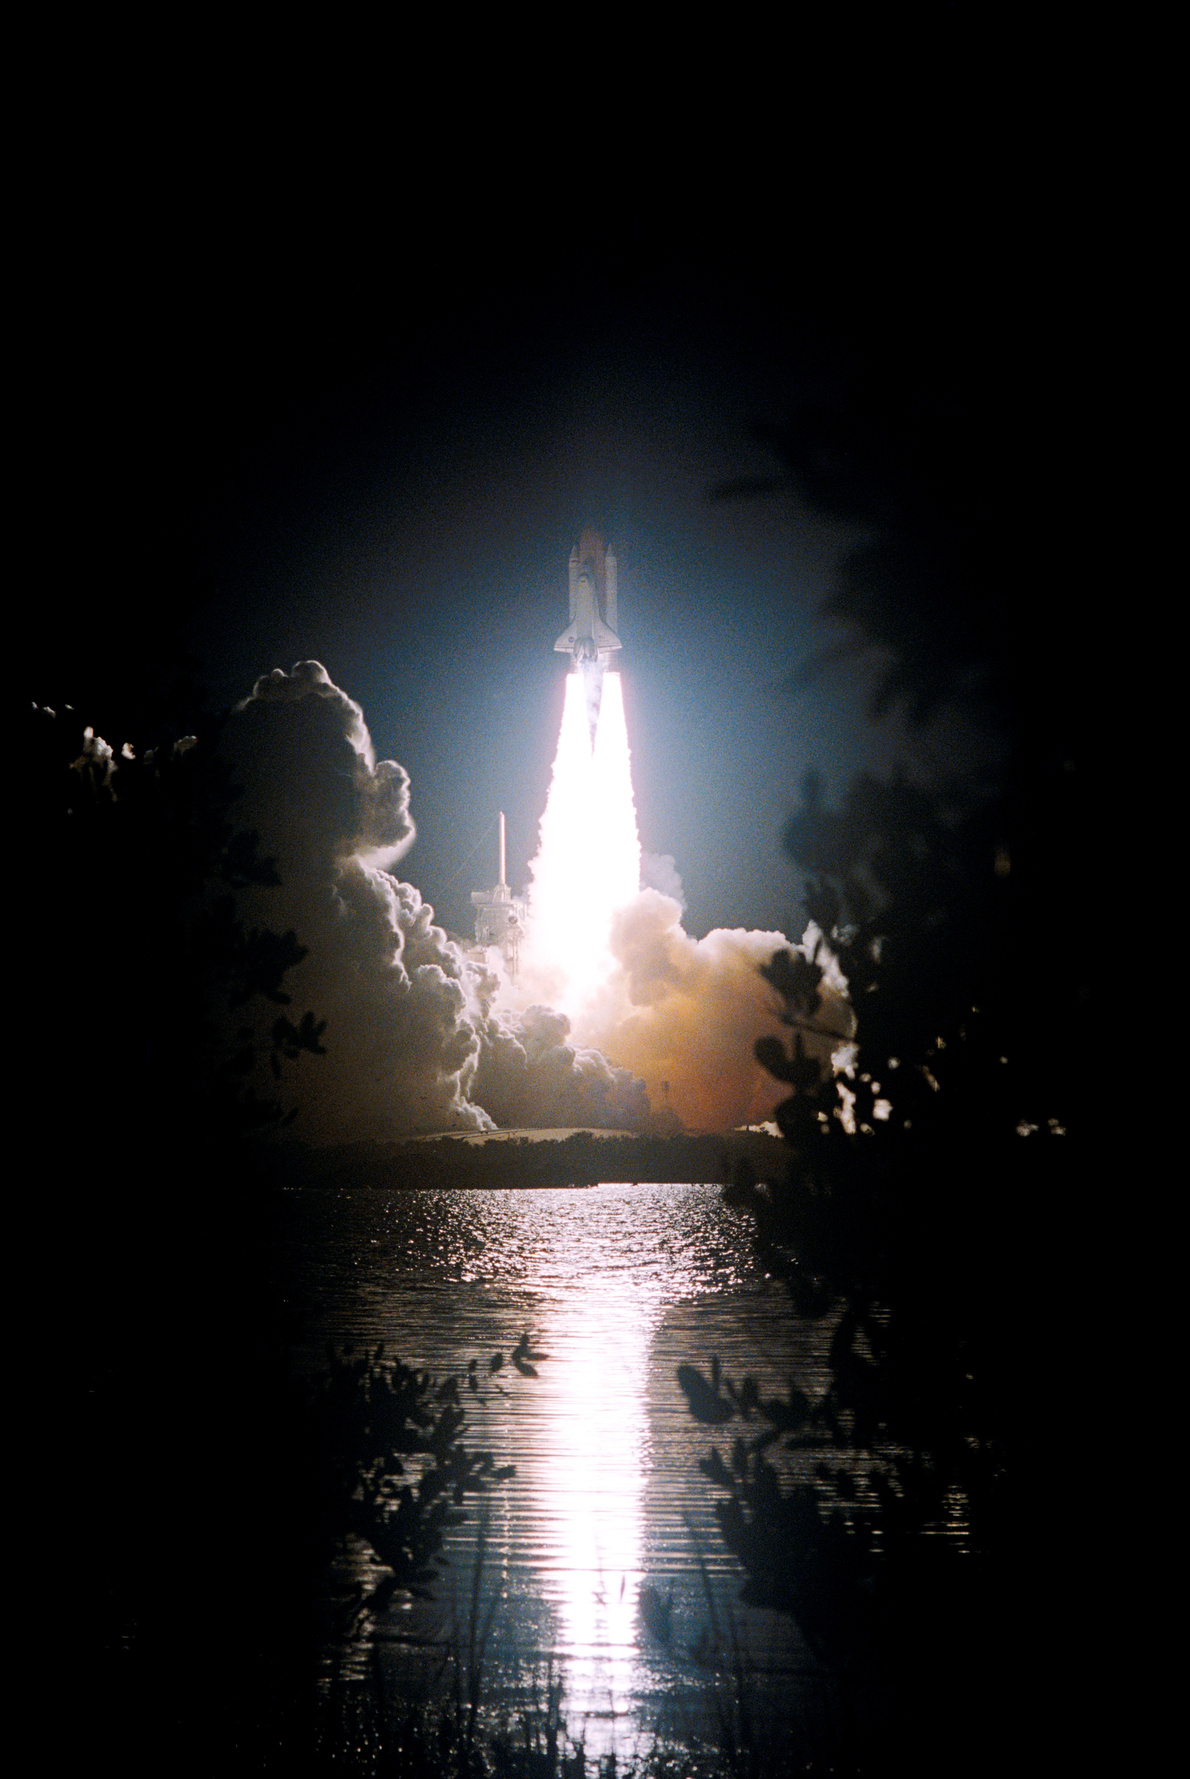 The fiery liftoff of Space Shuttle Discovery from Launch Pad 39B on mission STS-116 is reflected in the nearby water.